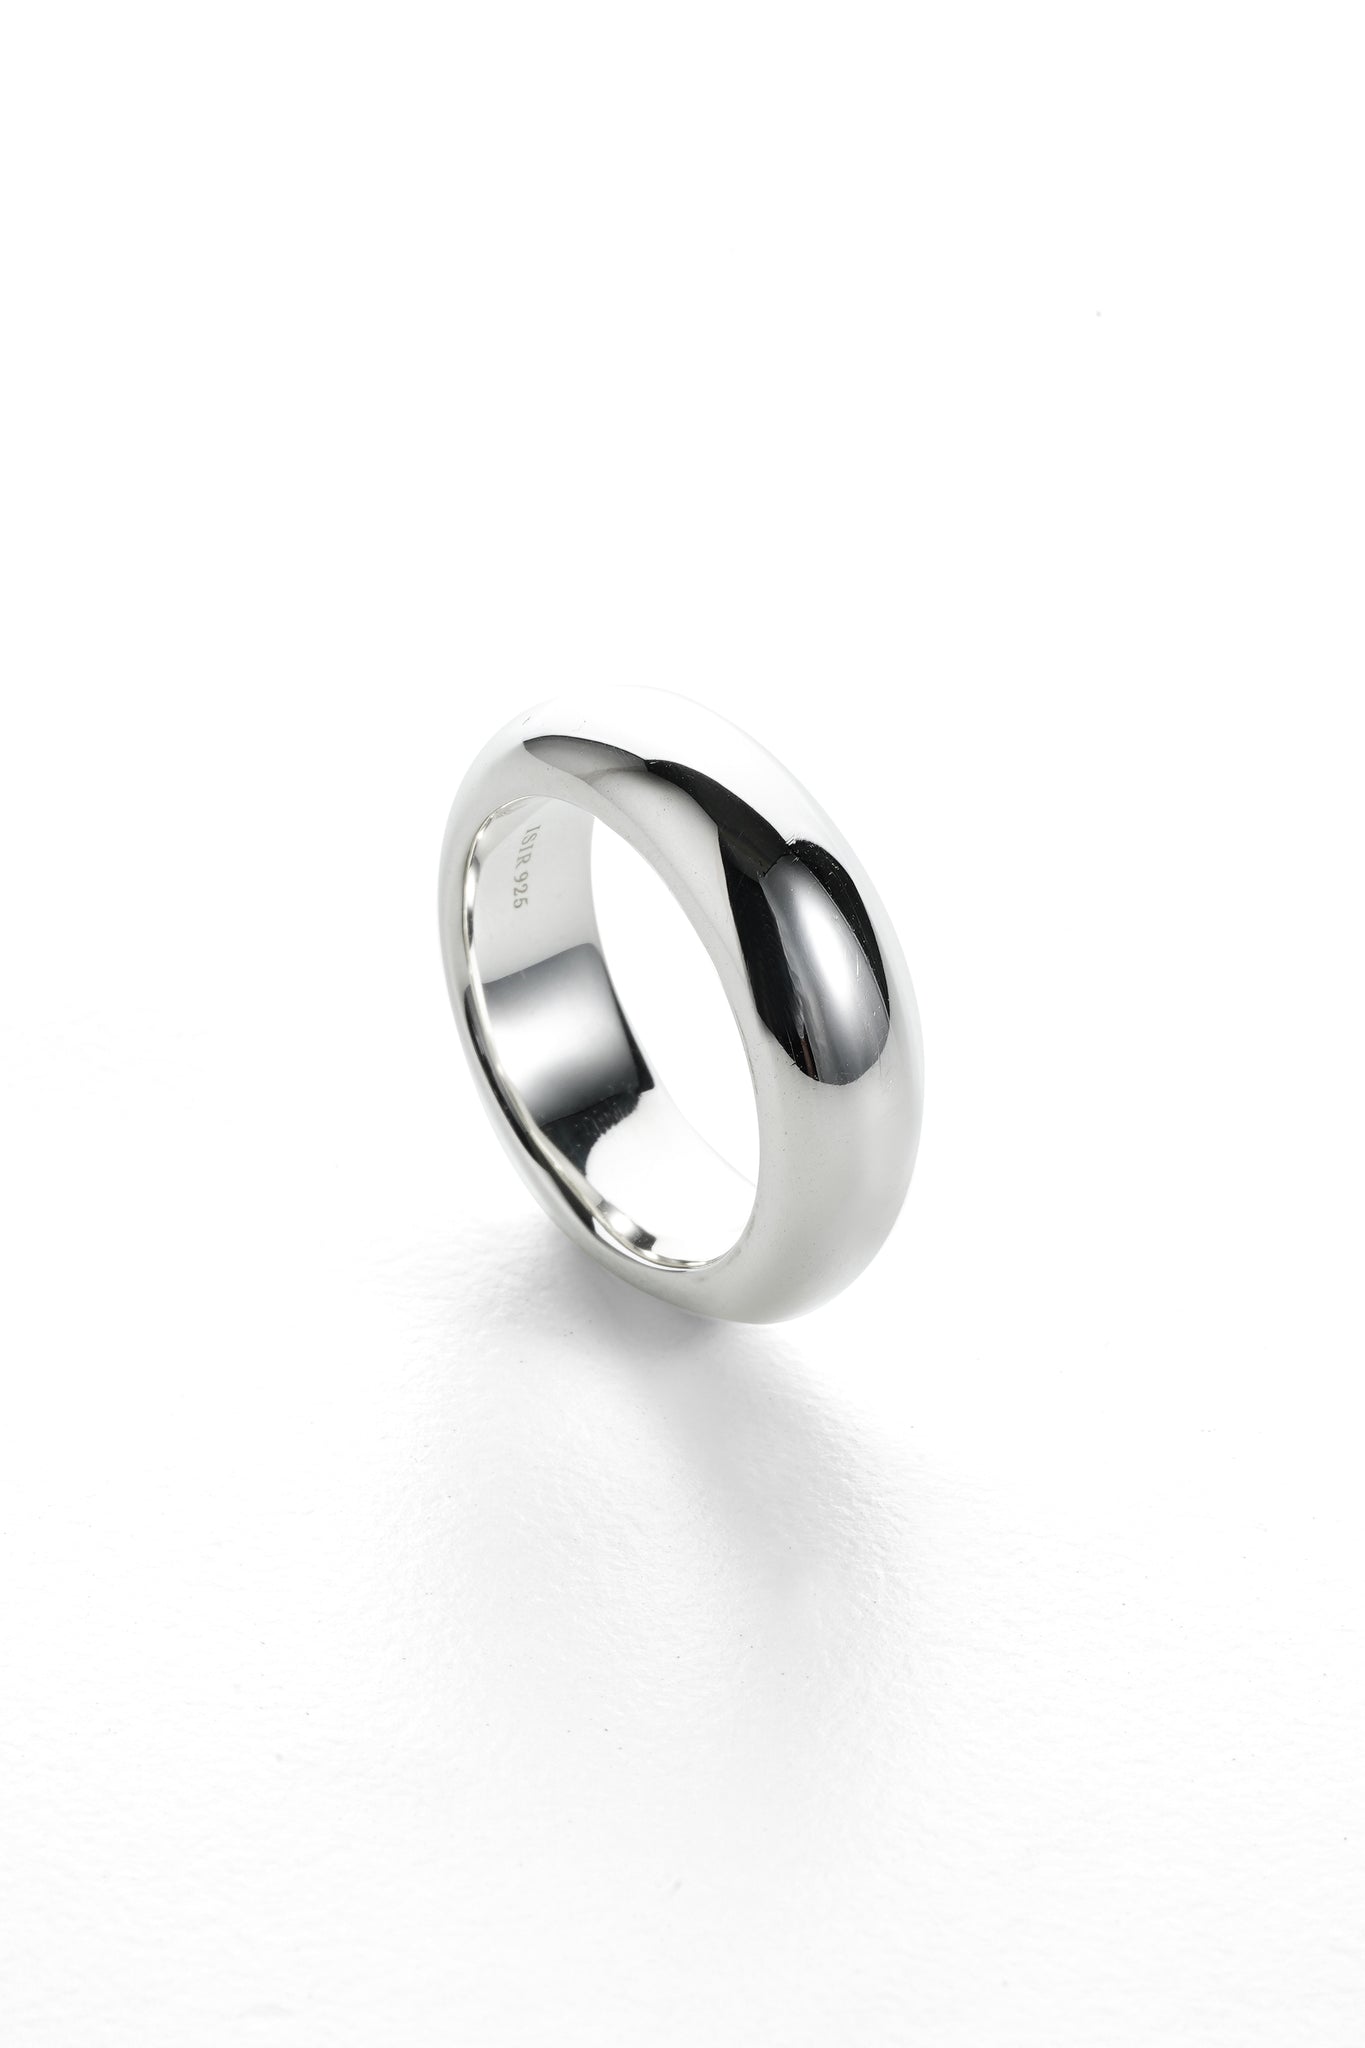 IN RING 6mm (SILVER925)